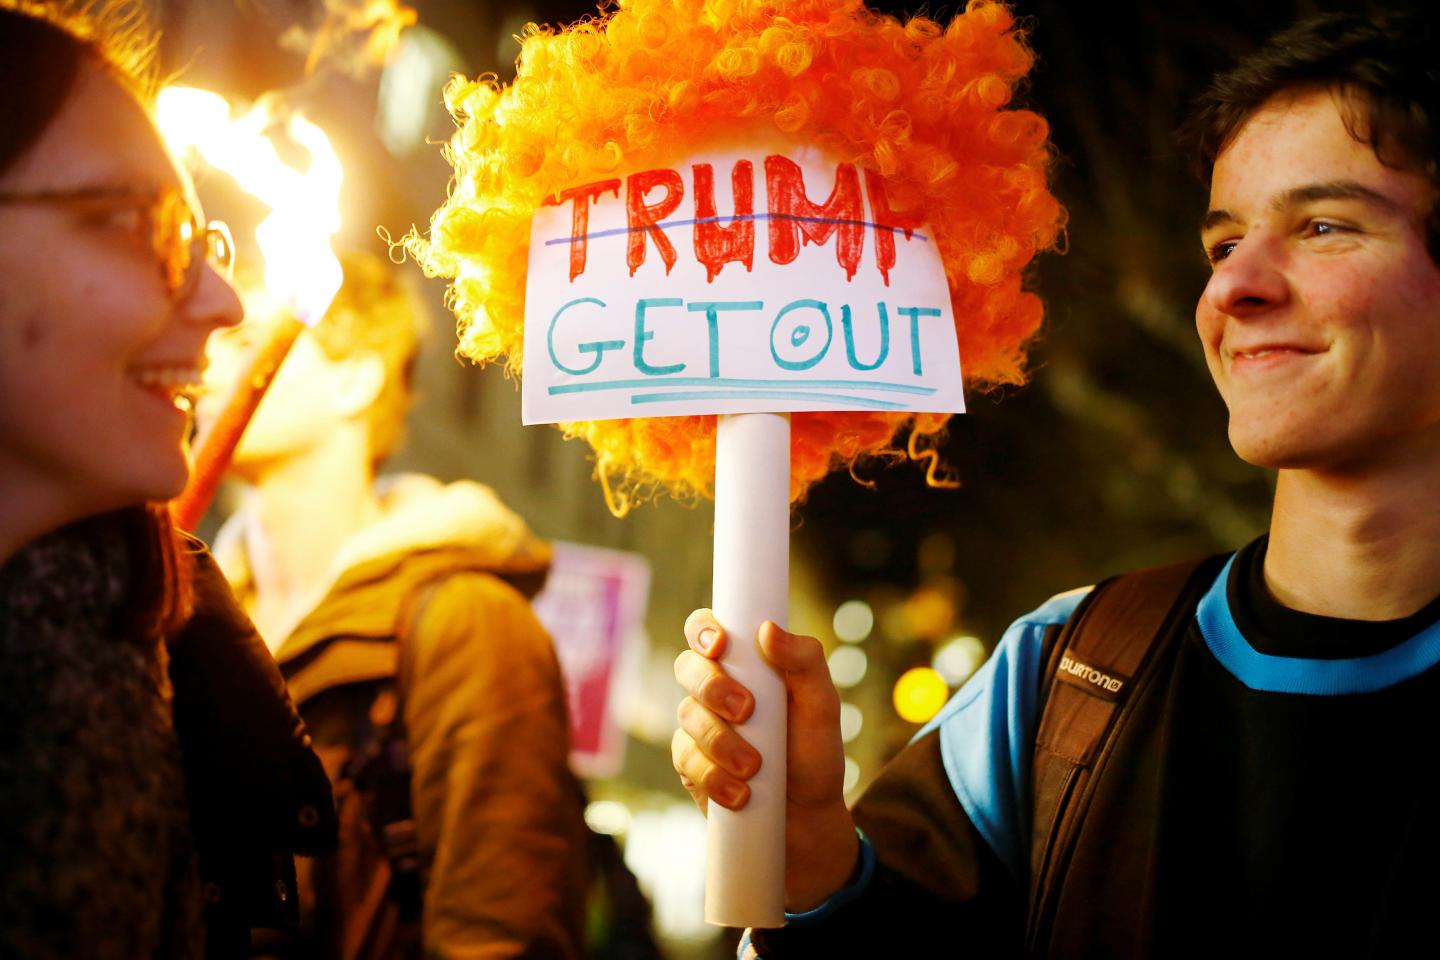 Trump get out, a sign held by young people.